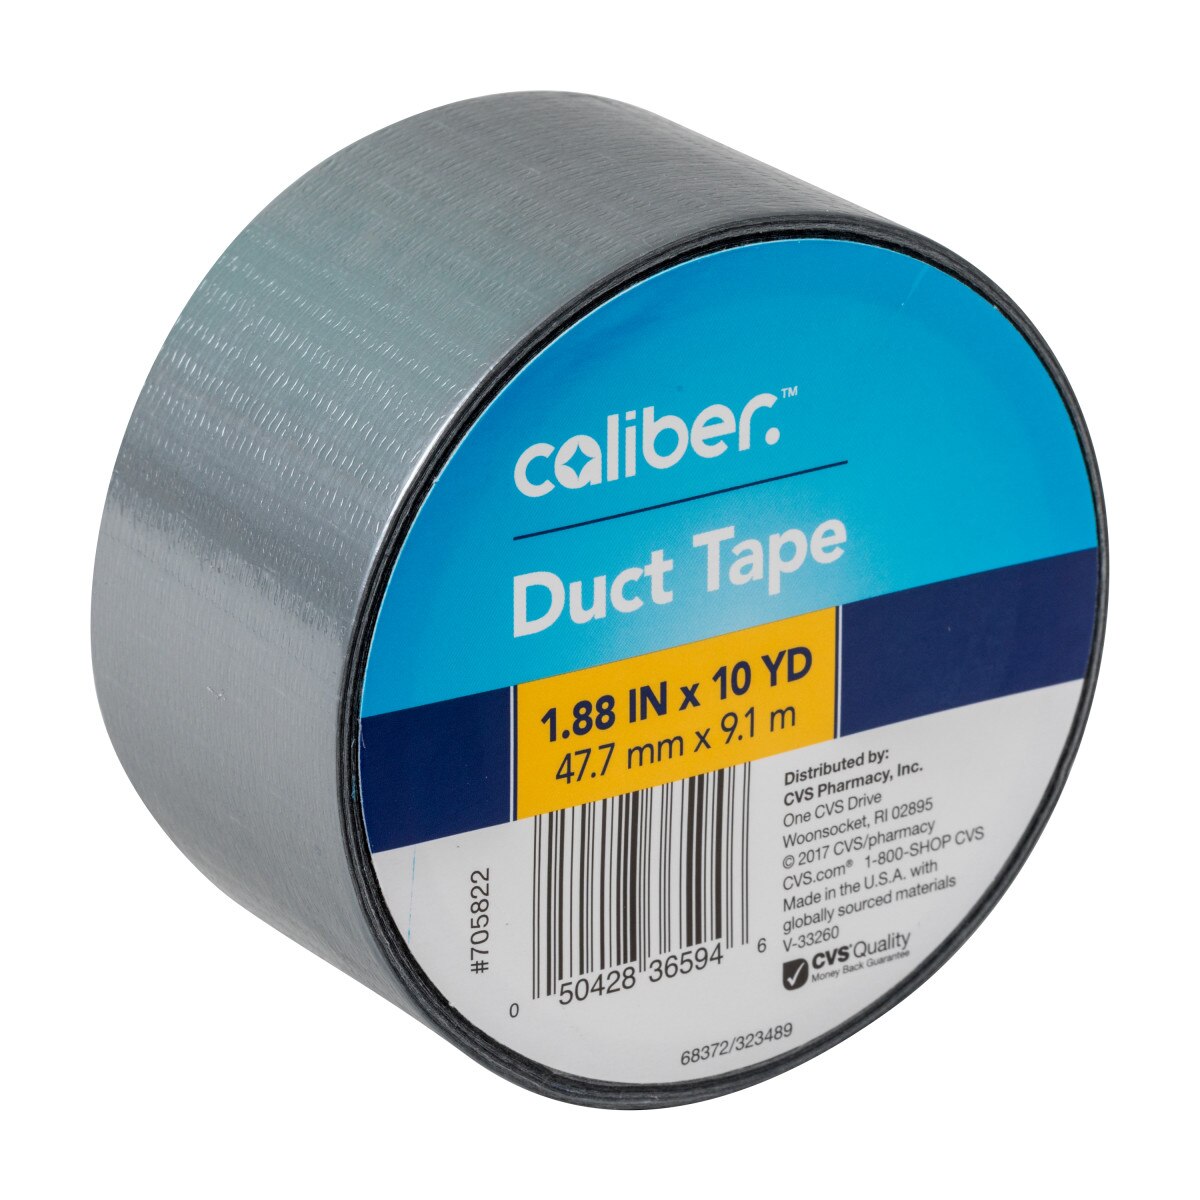 Caliber Duct Tape - Silver, 1.88 In. X 10 Yd. , CVS